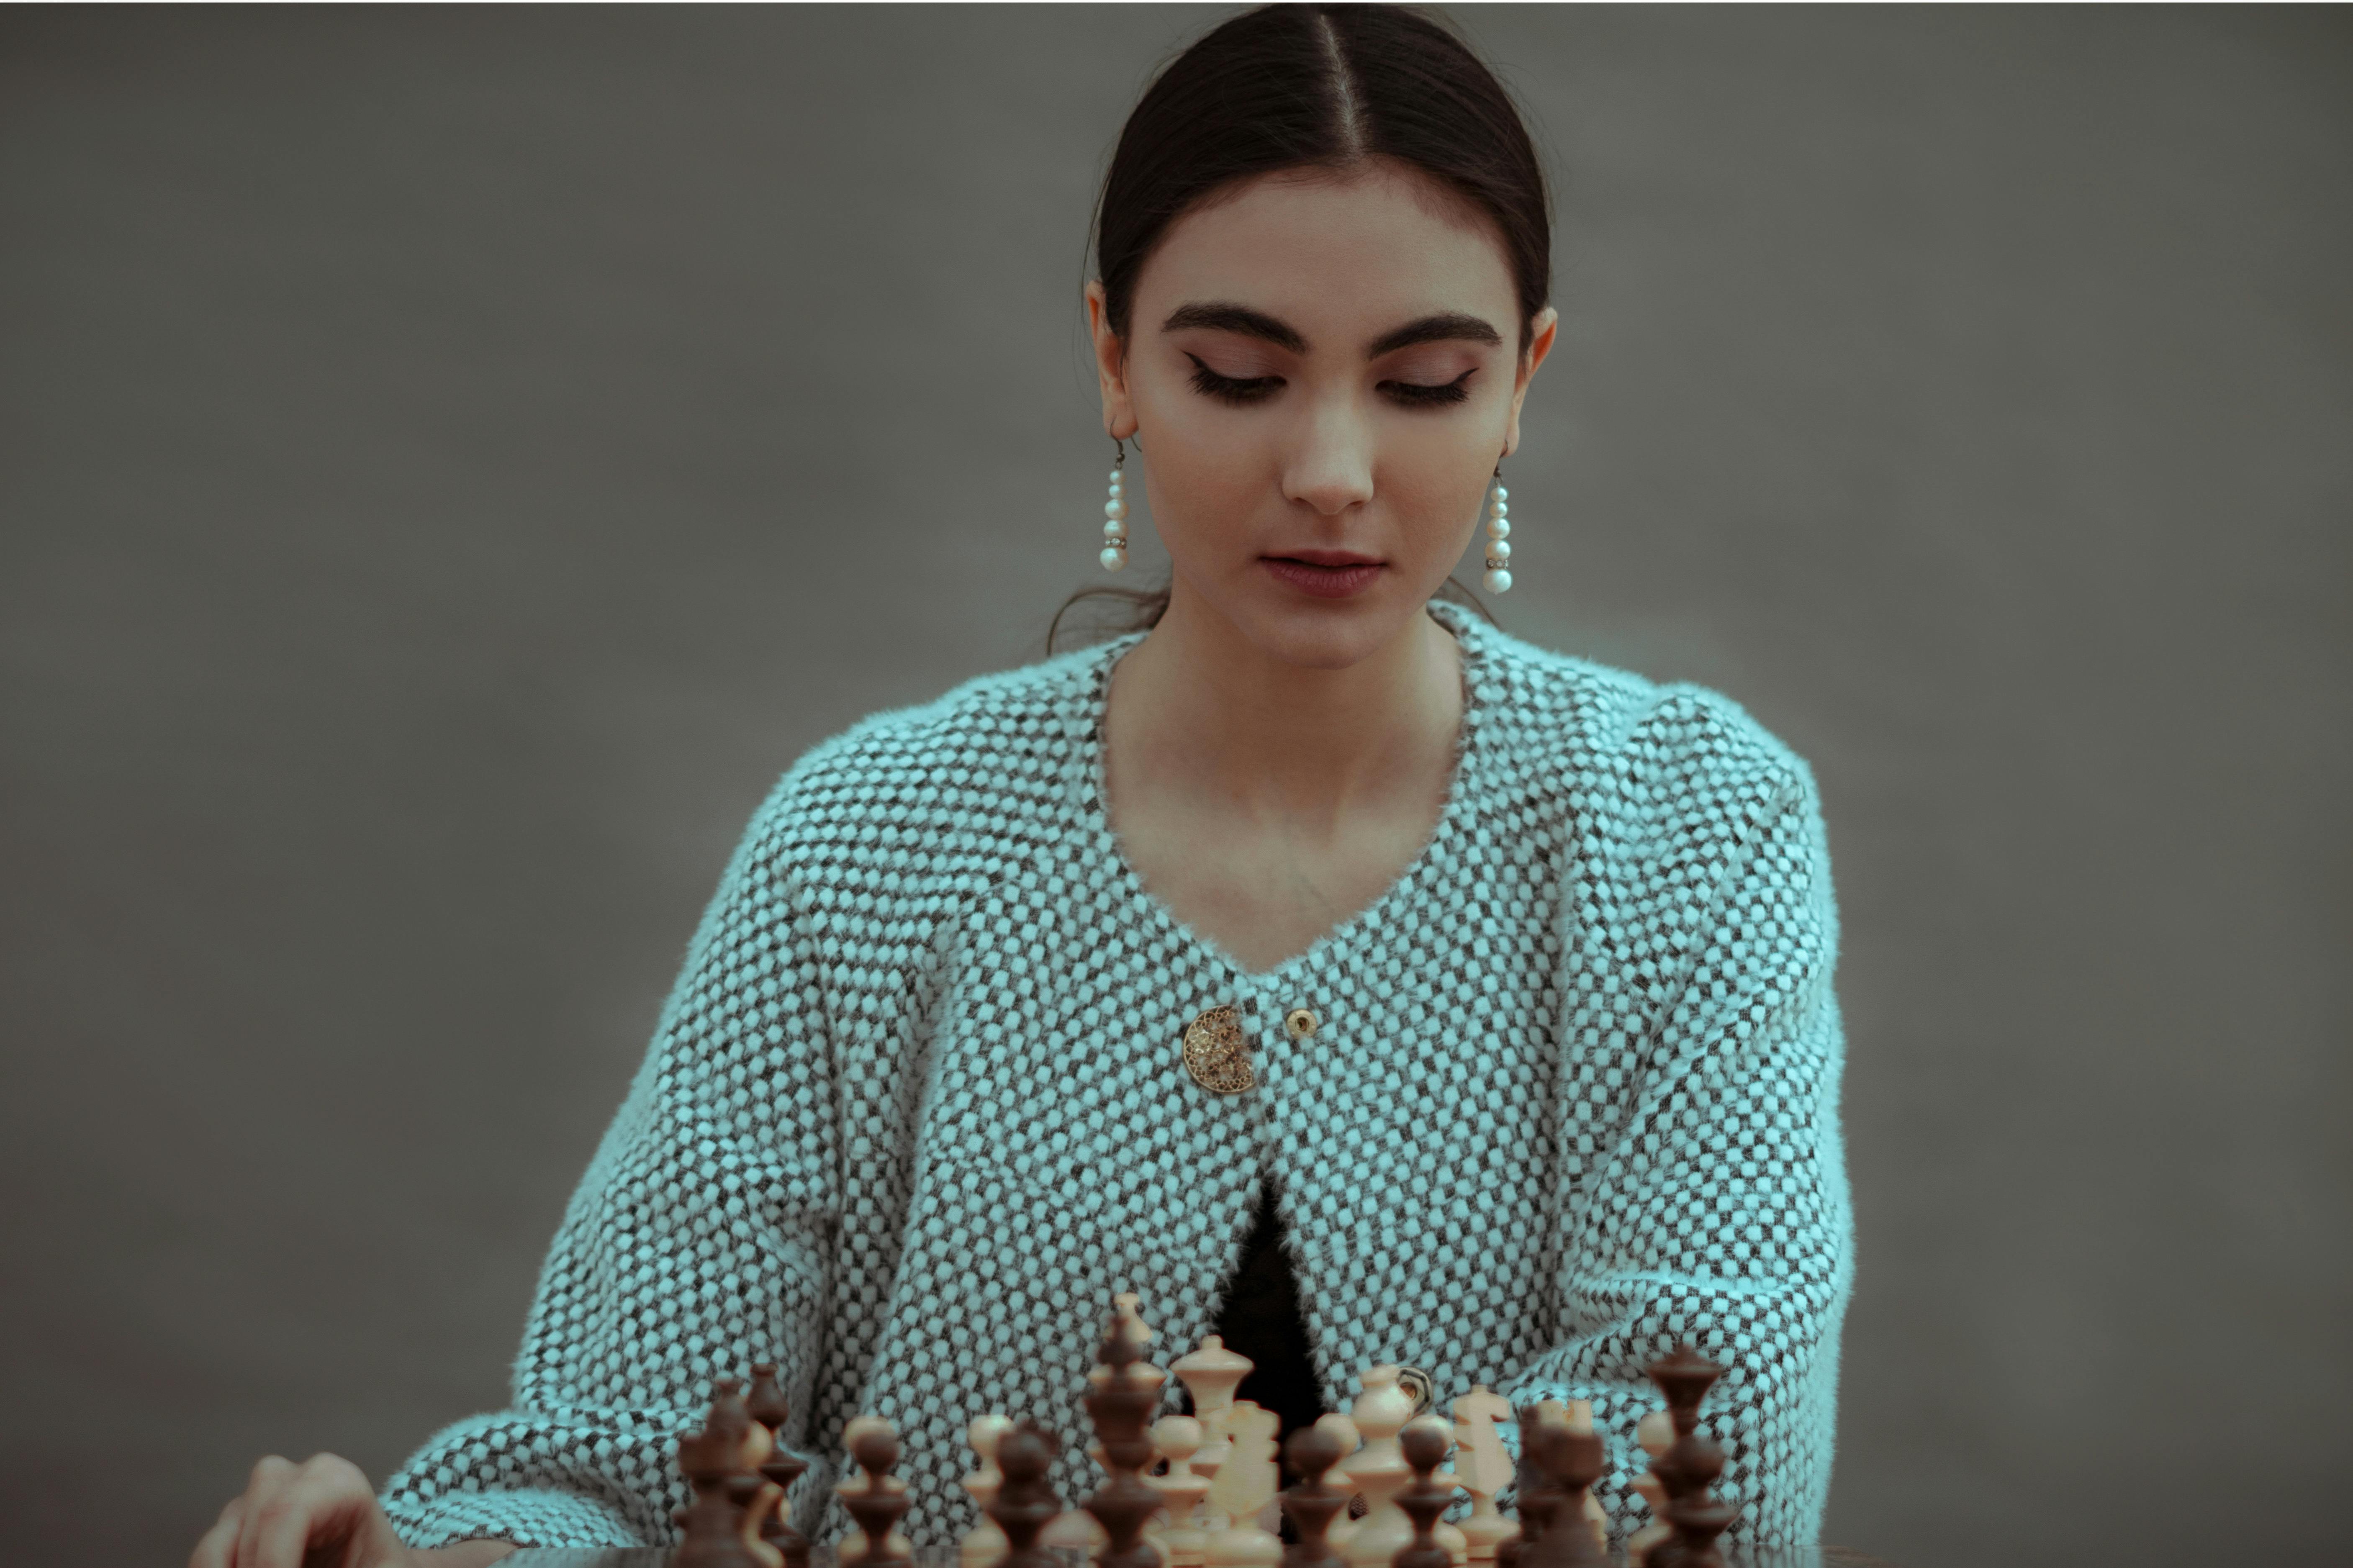 woman studying the next chess move, Stock image